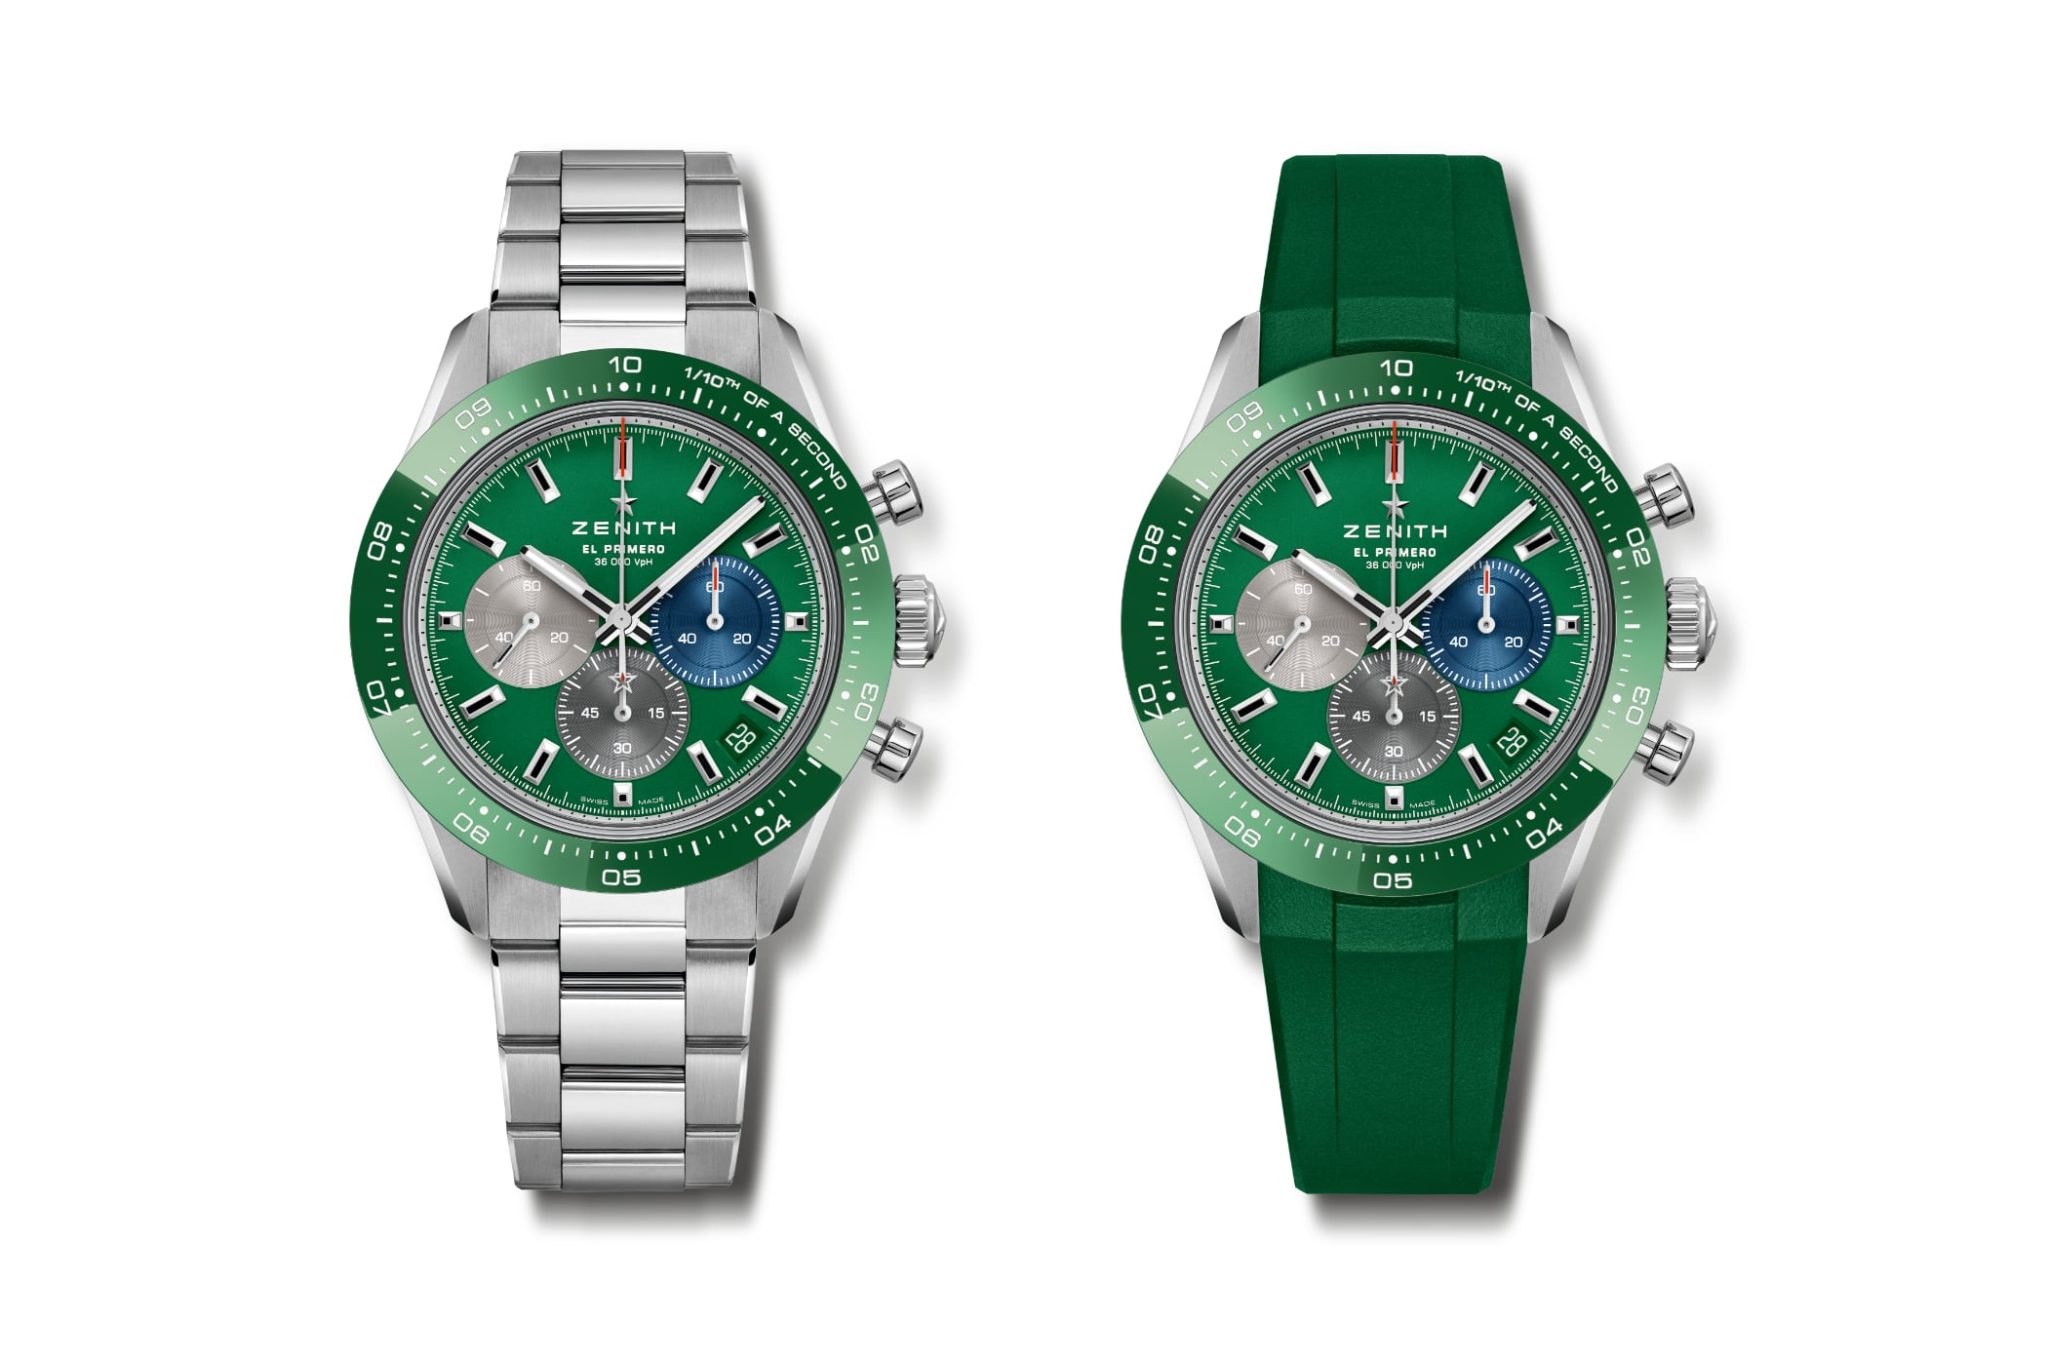 zenith-chronomaster-sport-green-03.3119.3600.56.M310-03.3119.360056.R952-side-by-side